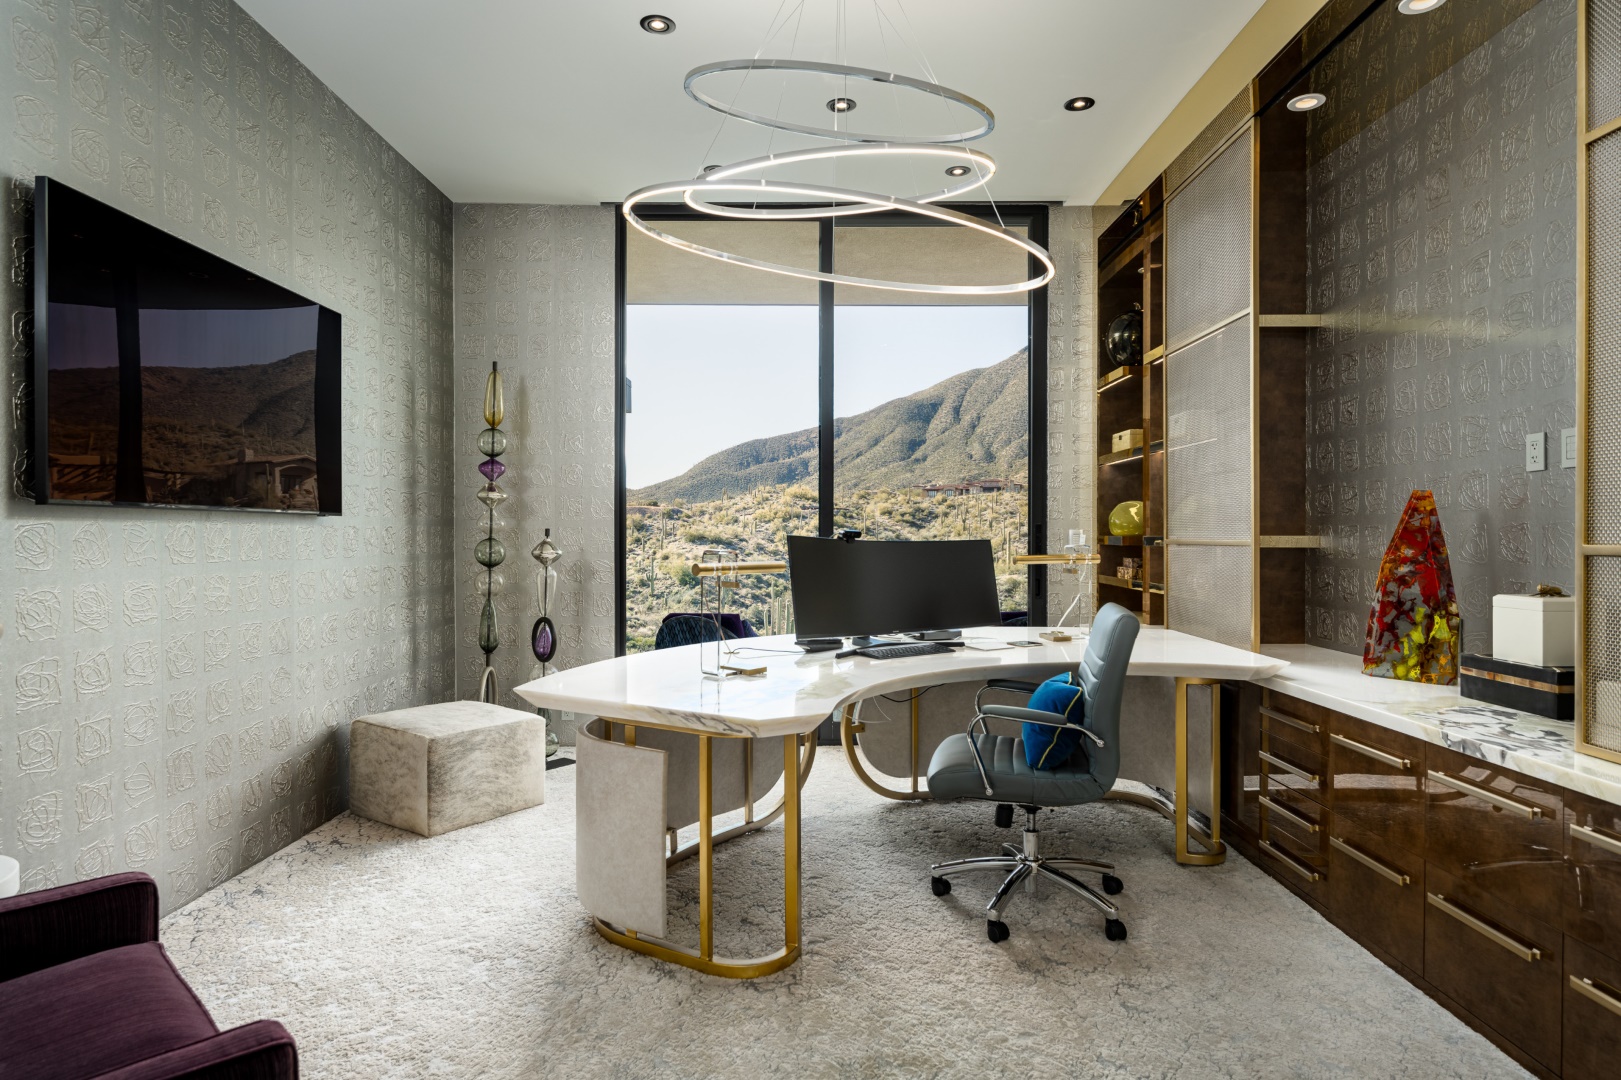 35 Home Office Decor Ideas + Designs for a Creative Work Space